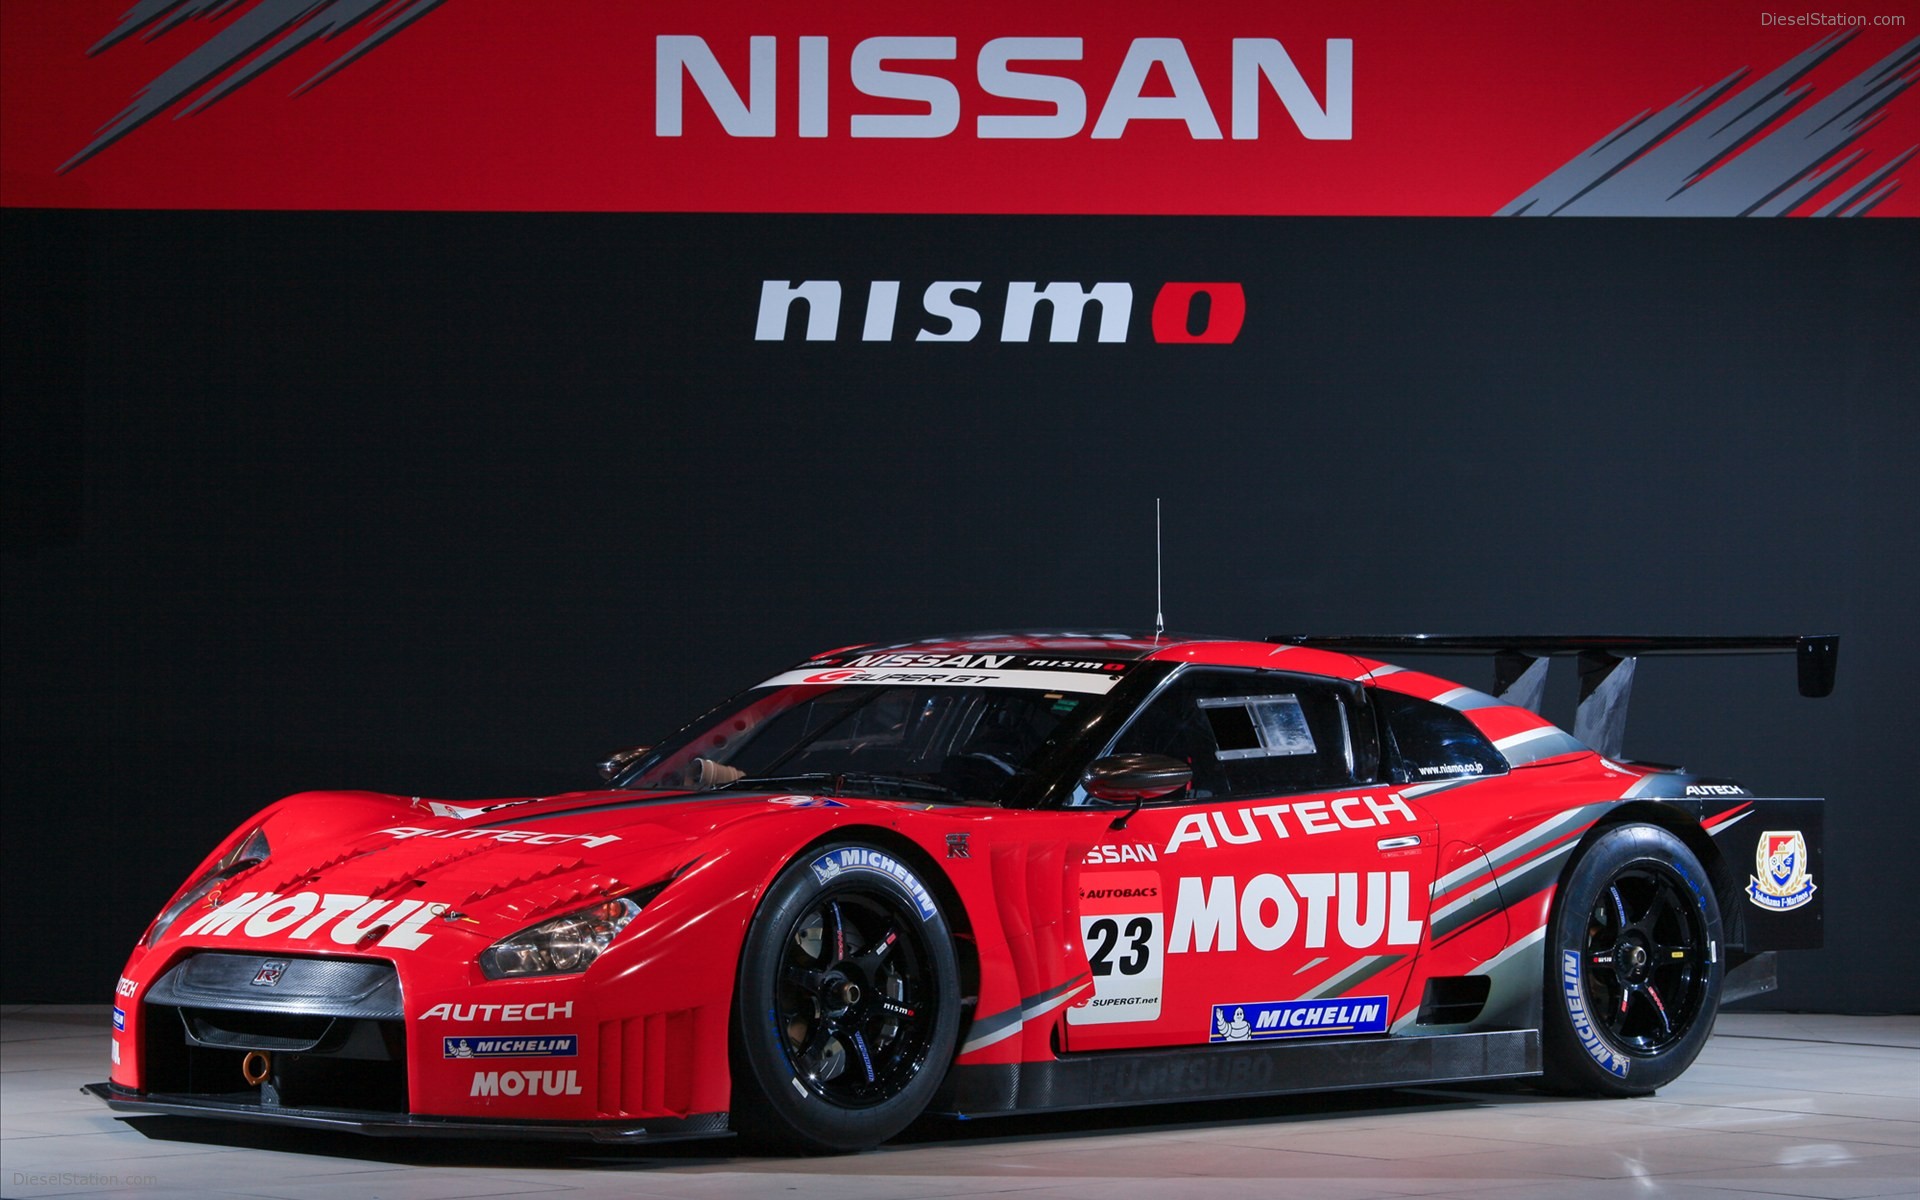 Nissan SUPER GT GT500 2010 Widescreen Exotic Car Image #04 of 10 ...